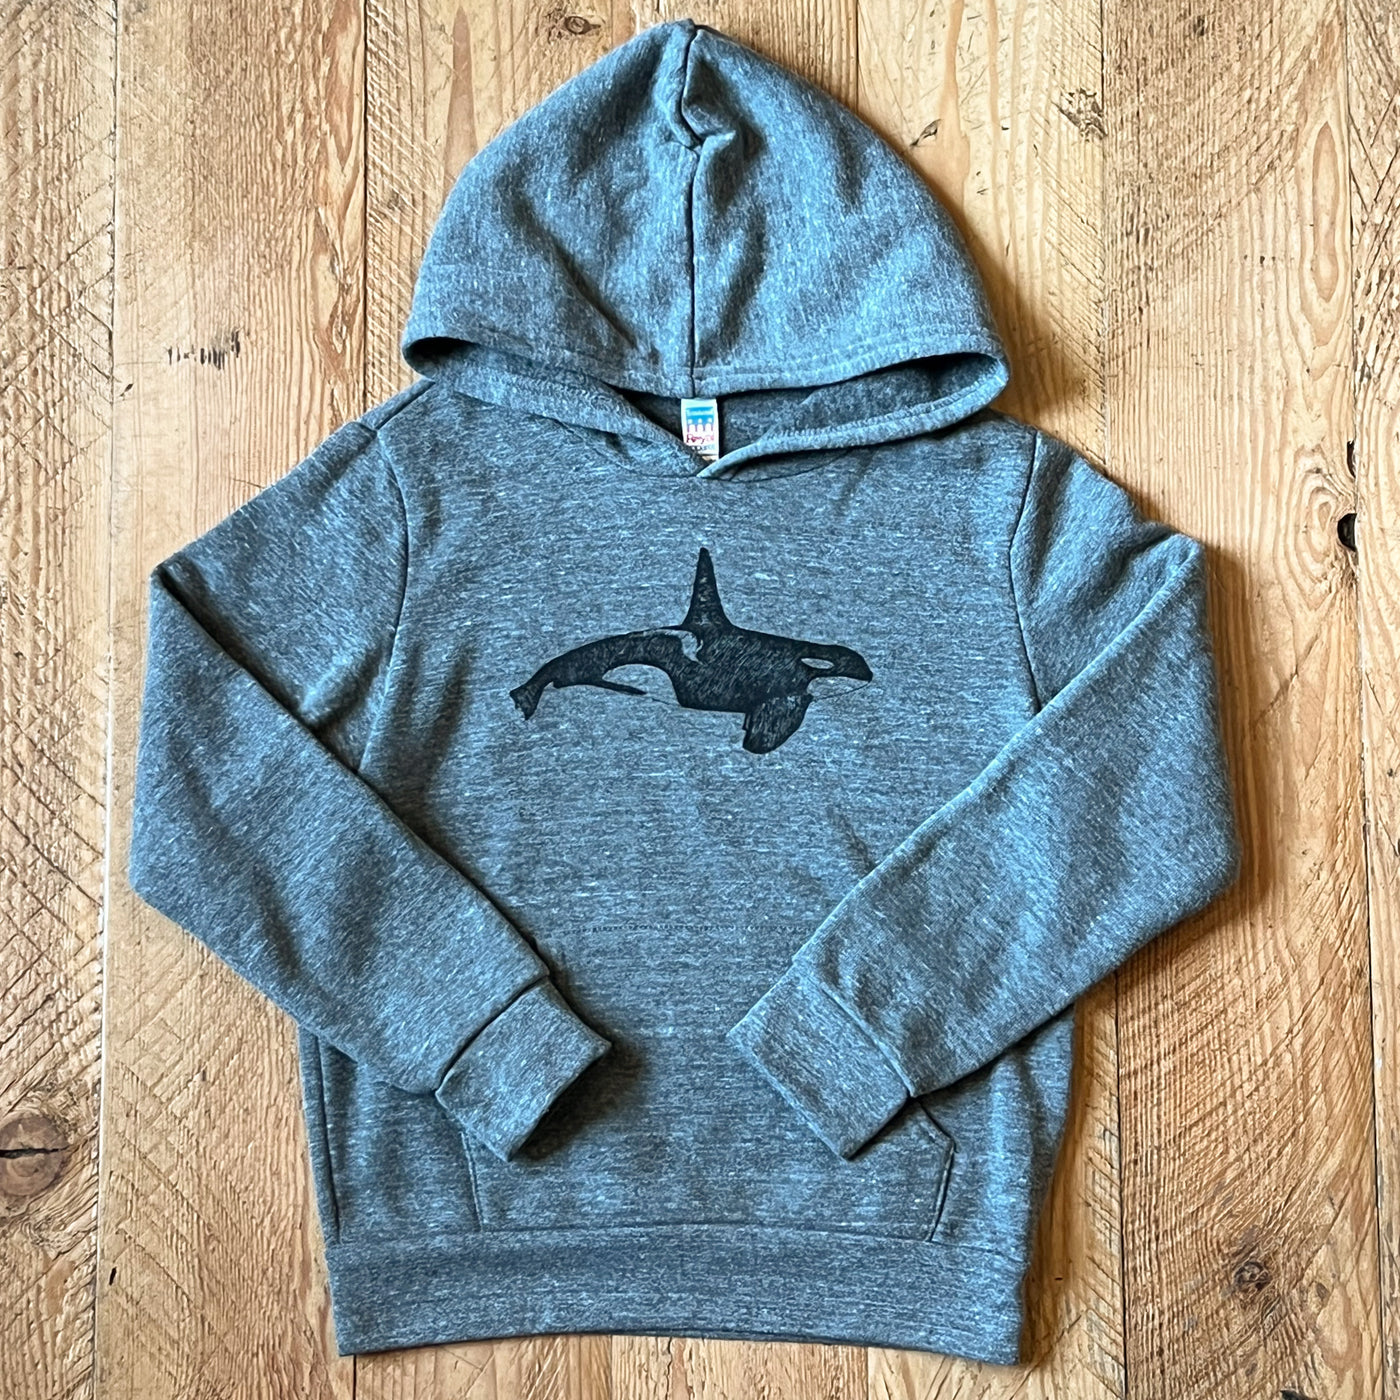 Orca whale - Youth Triblend Fleece Hoodie (Vintage grey)